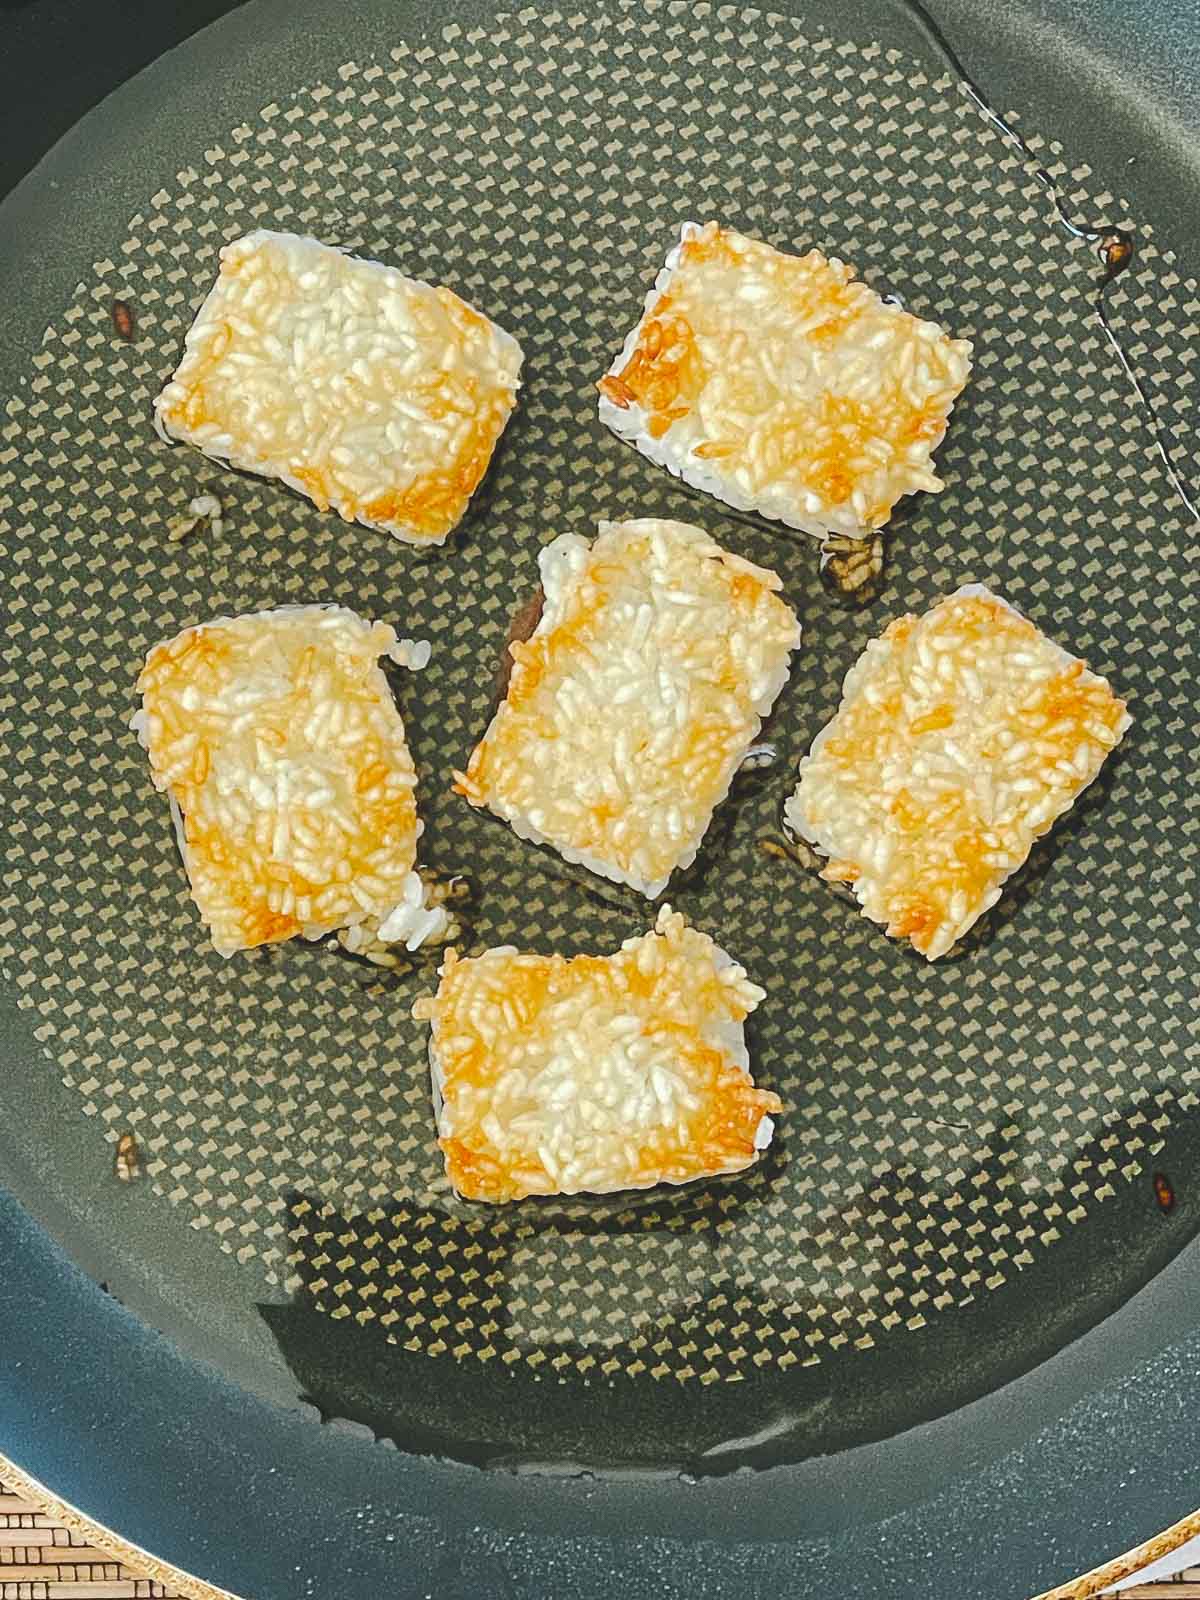 Golden crispy rice squares frying in a frying pan with oil.